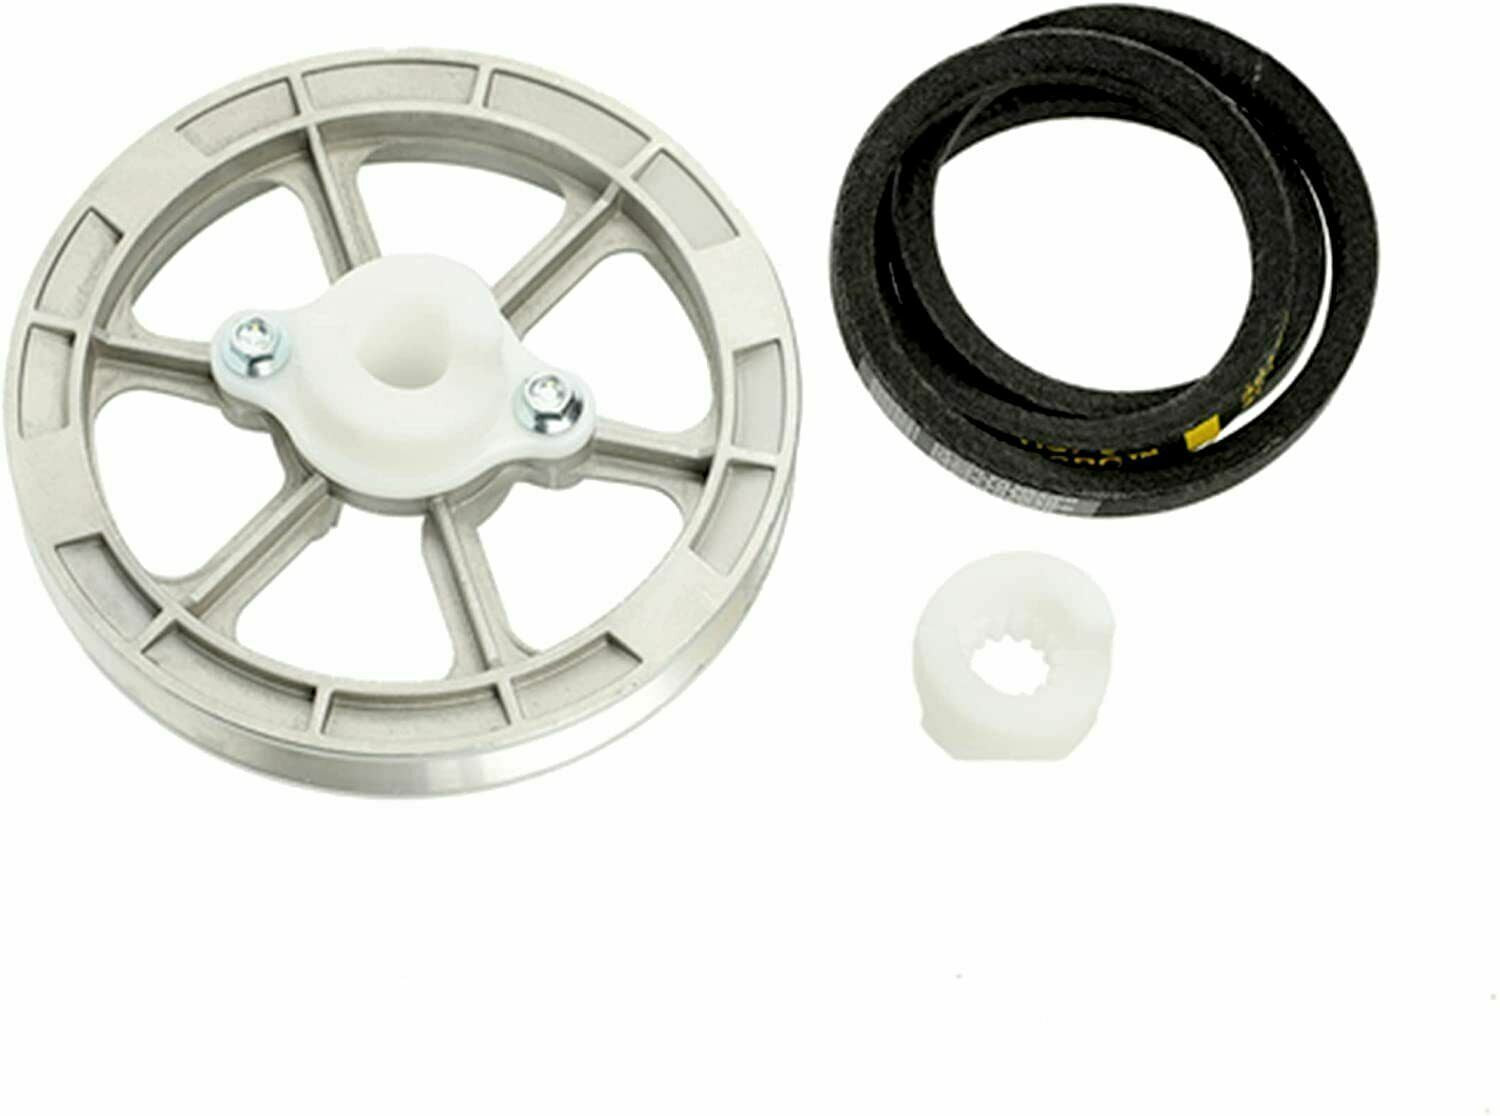 New OEM Genuine Speed Queen # 204486 Washer Aluminum Pulley With Belt Kit